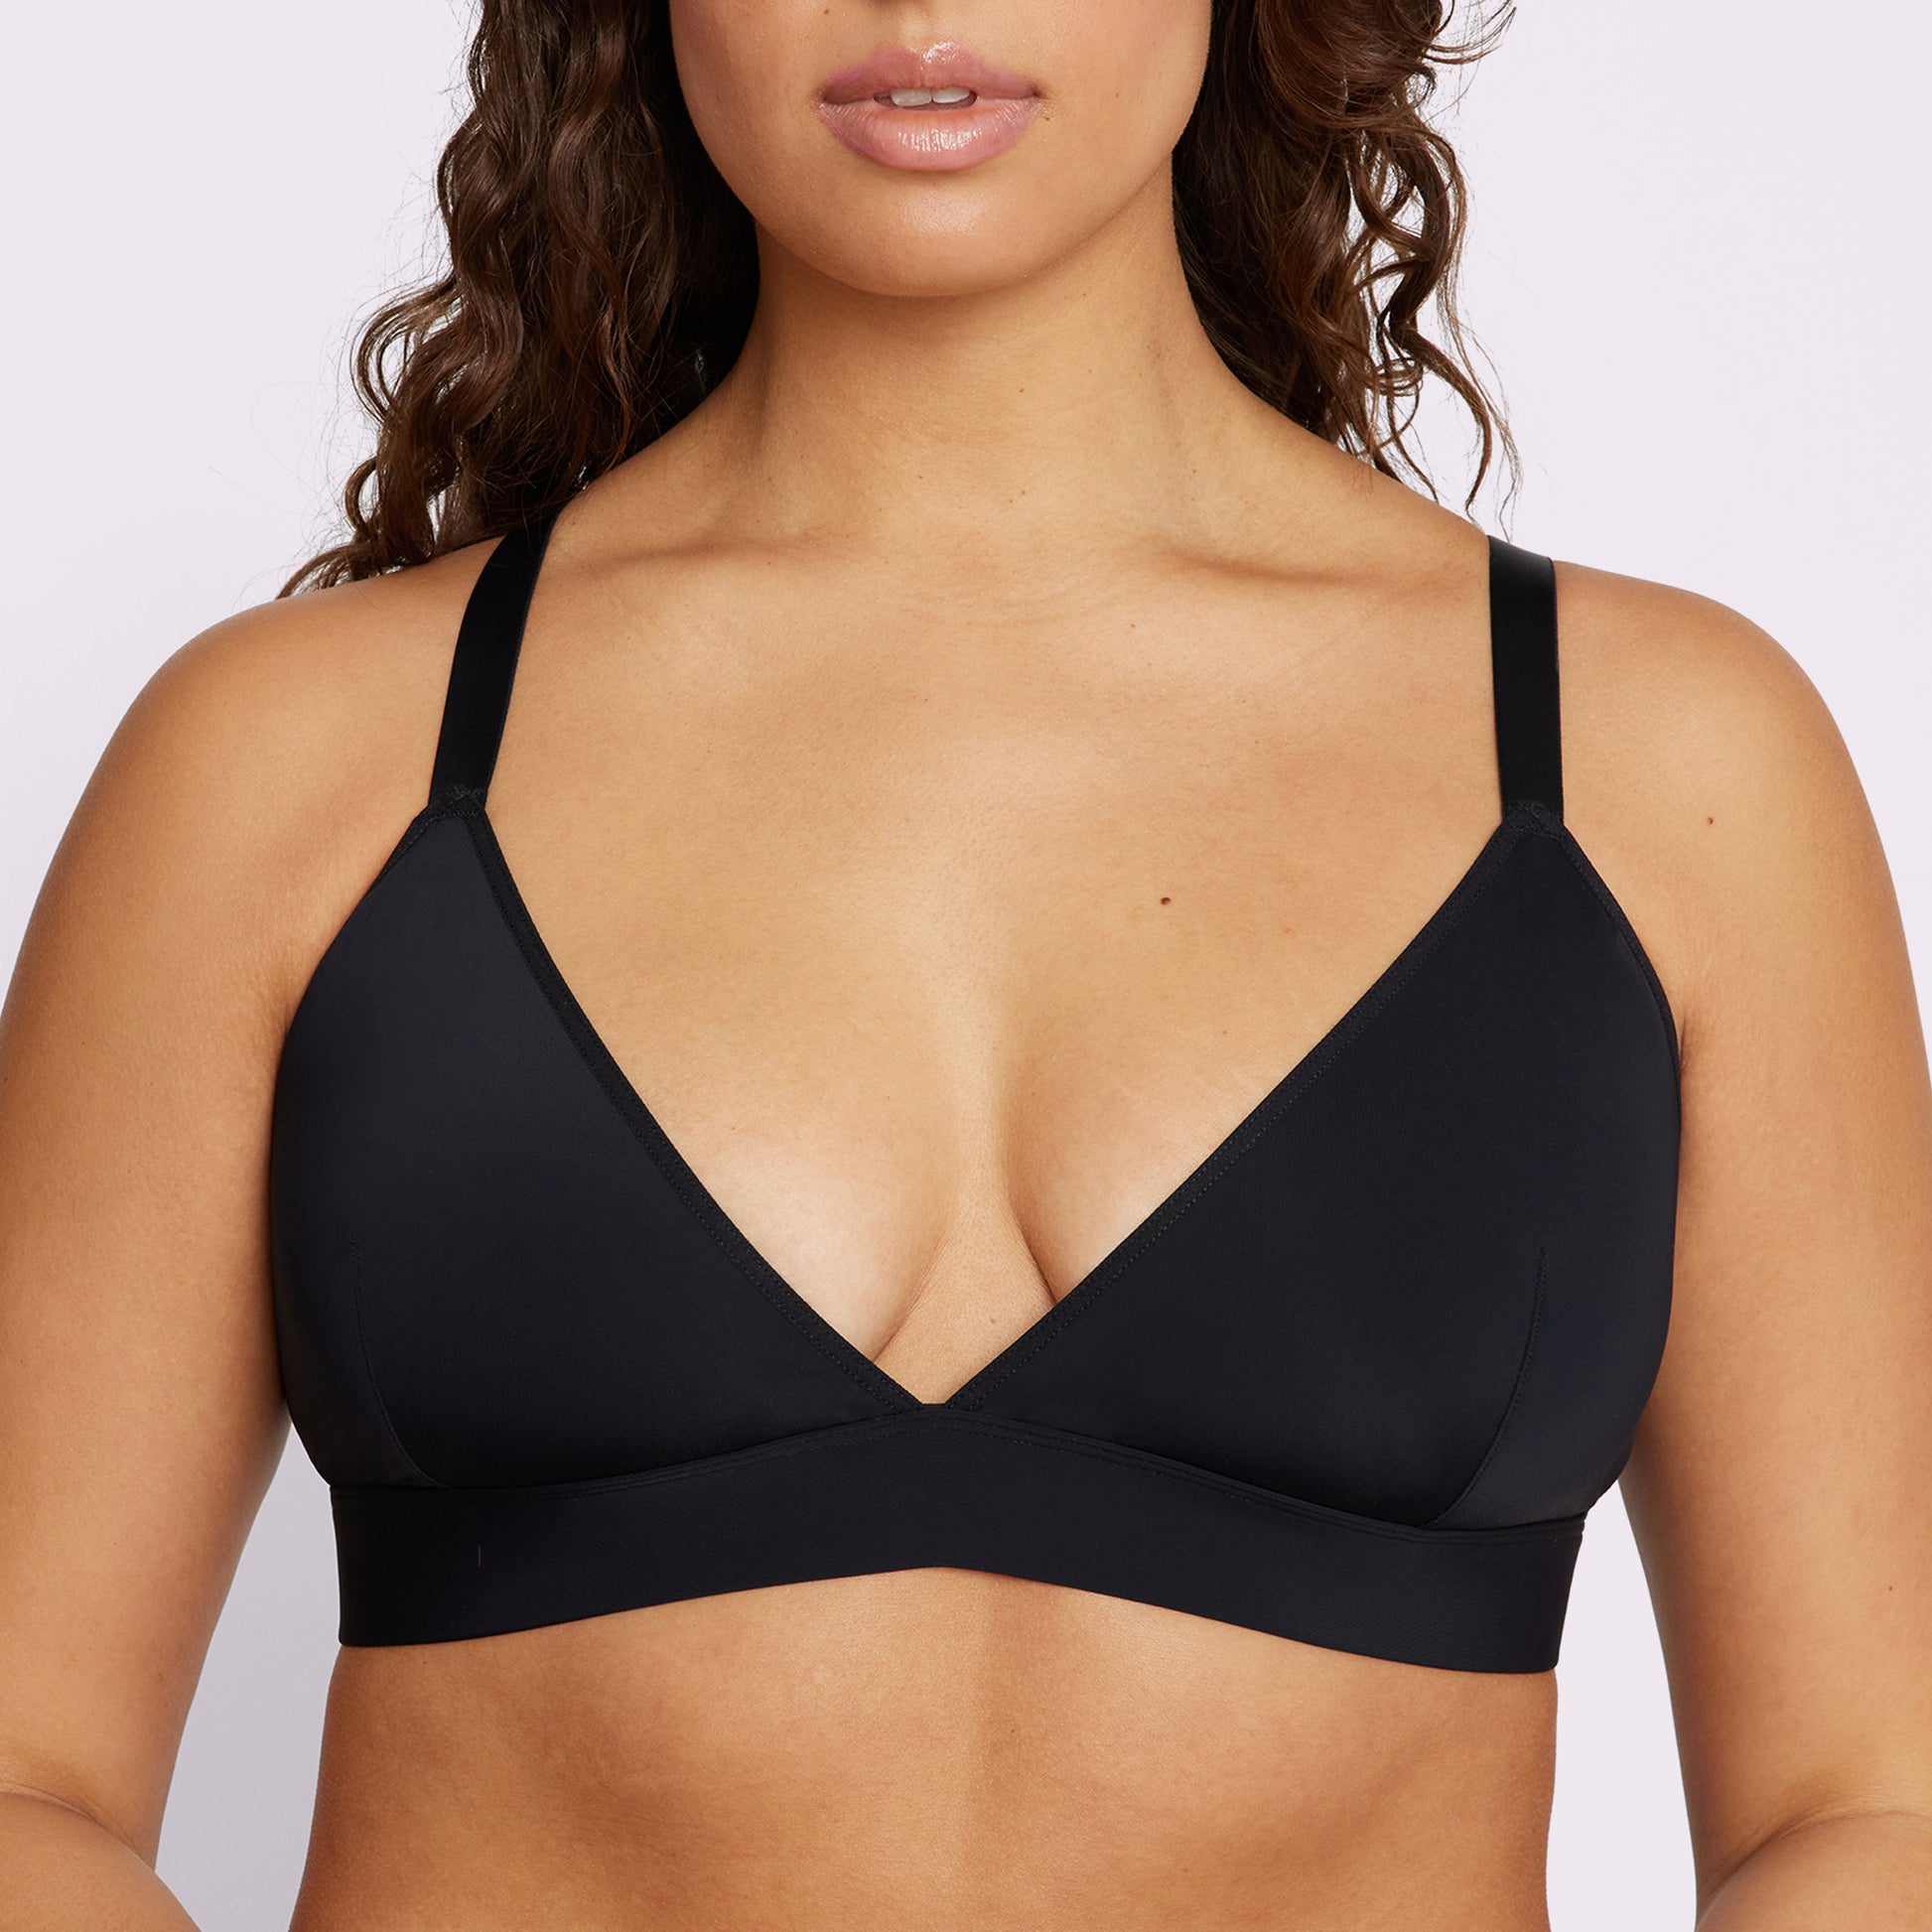 Parade Women's Re:play Triangle Wireless Bralette - Eightball S2 : Target